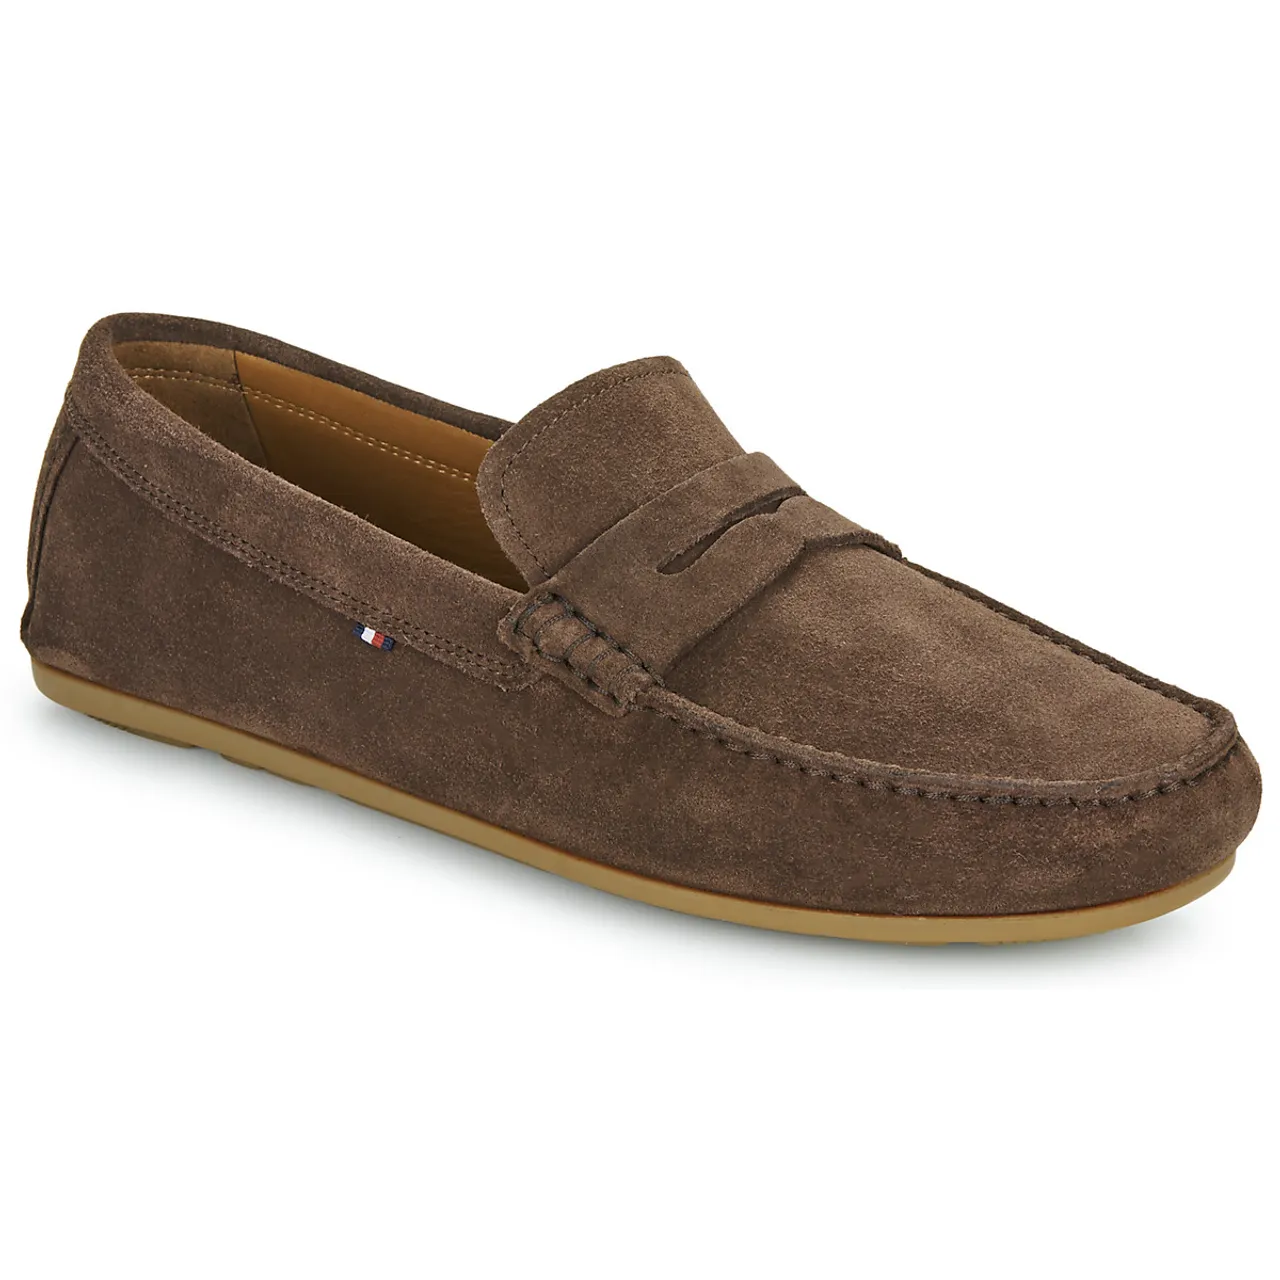 Tommy Hilfiger  CASUAL HILFIGER SUEDE DRIVER  men's Loafers / Casual Shoes in Brown